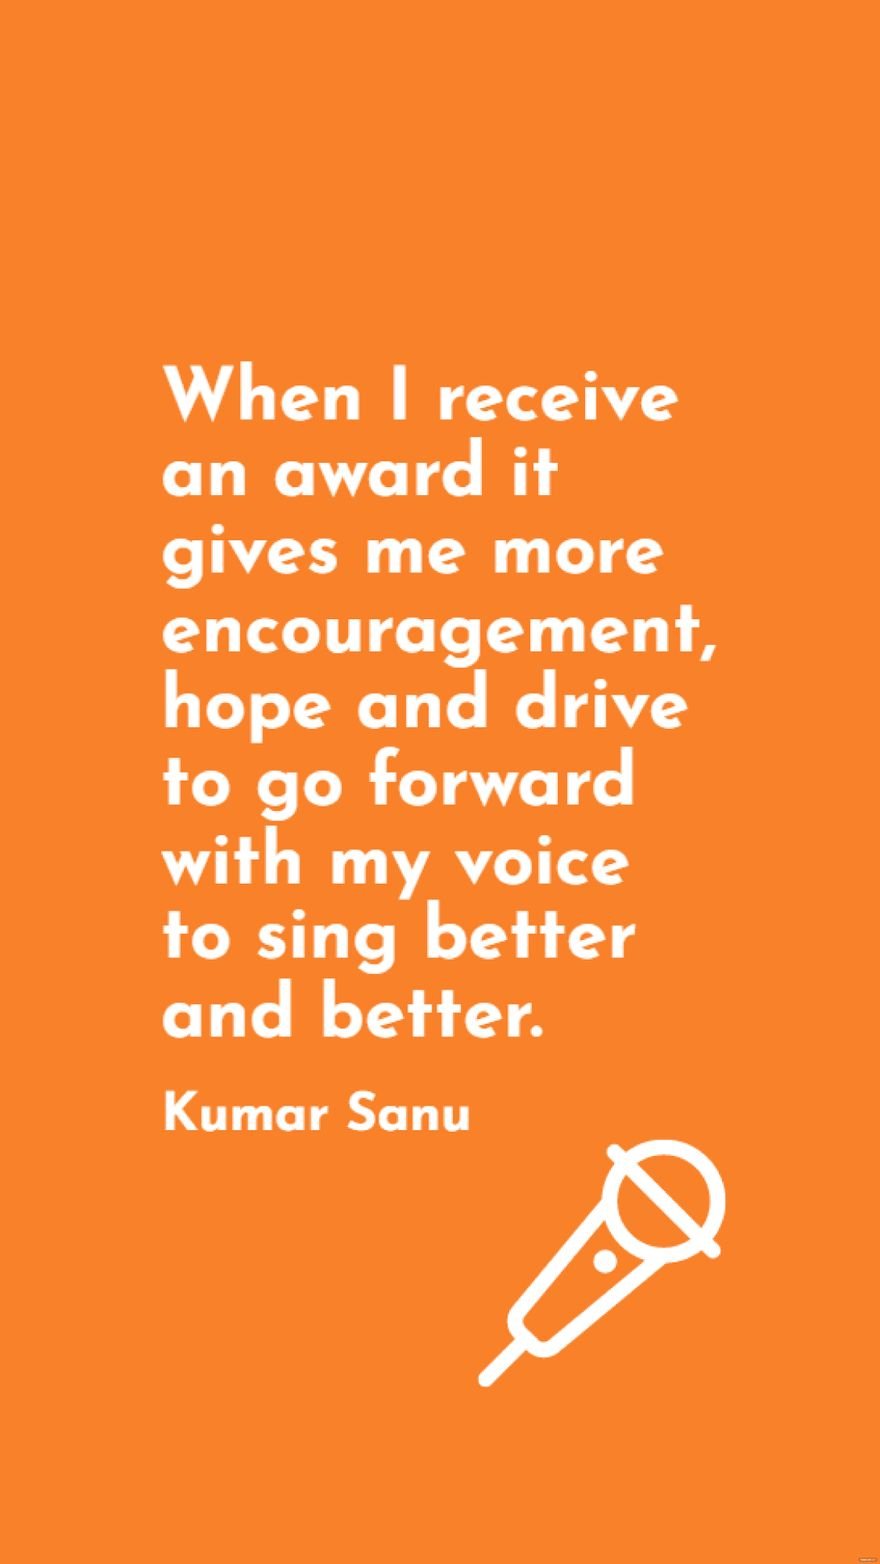 Kumar Sanu - When I receive an award it gives me more encouragement, hope and drive to go forward with my voice to sing better and better.